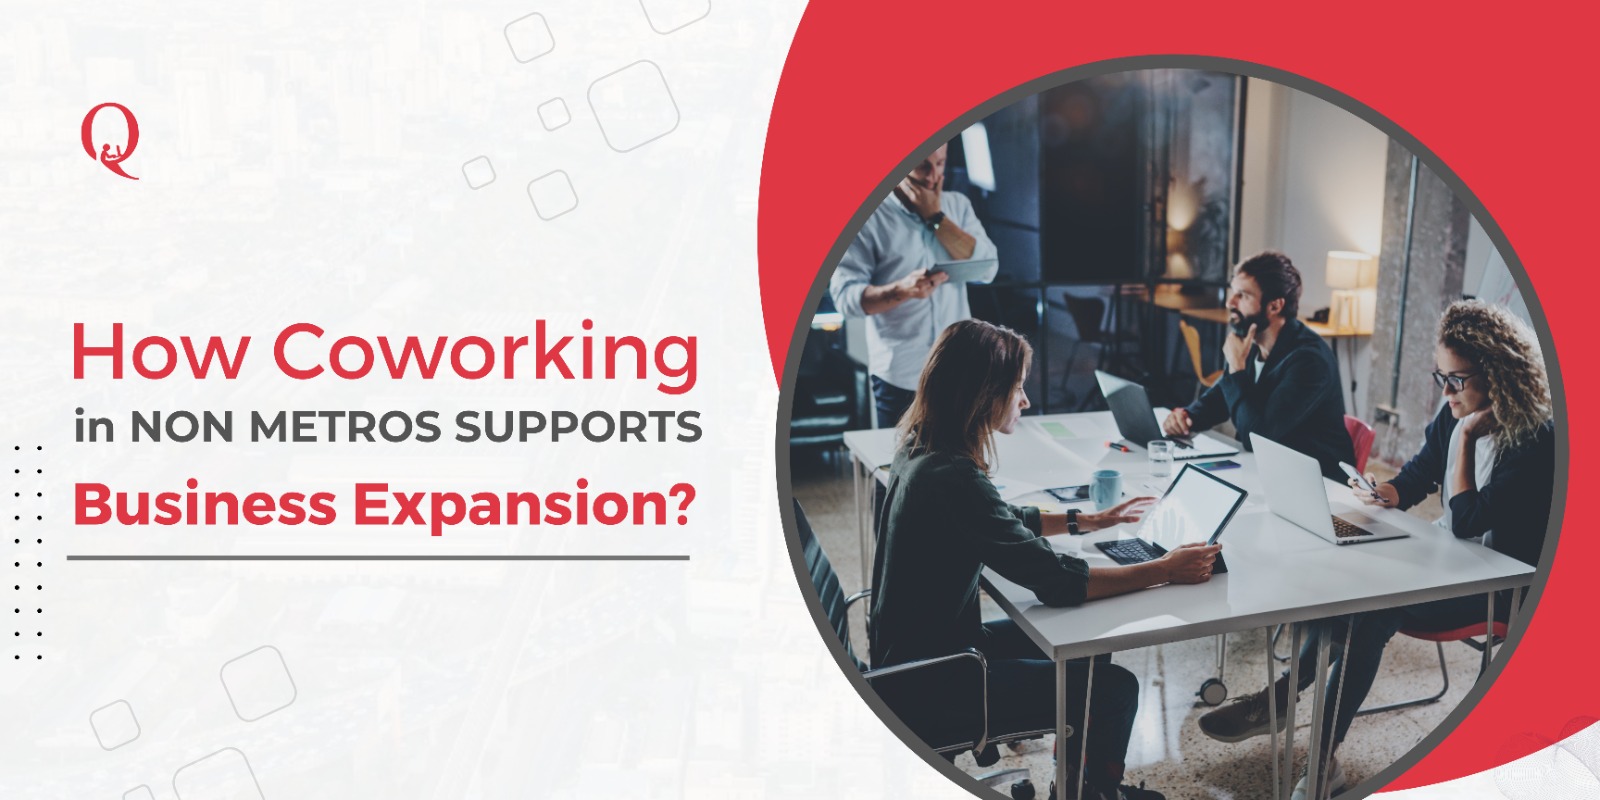 How Coworking in NON METROS SUPPORTS Business Expansion?